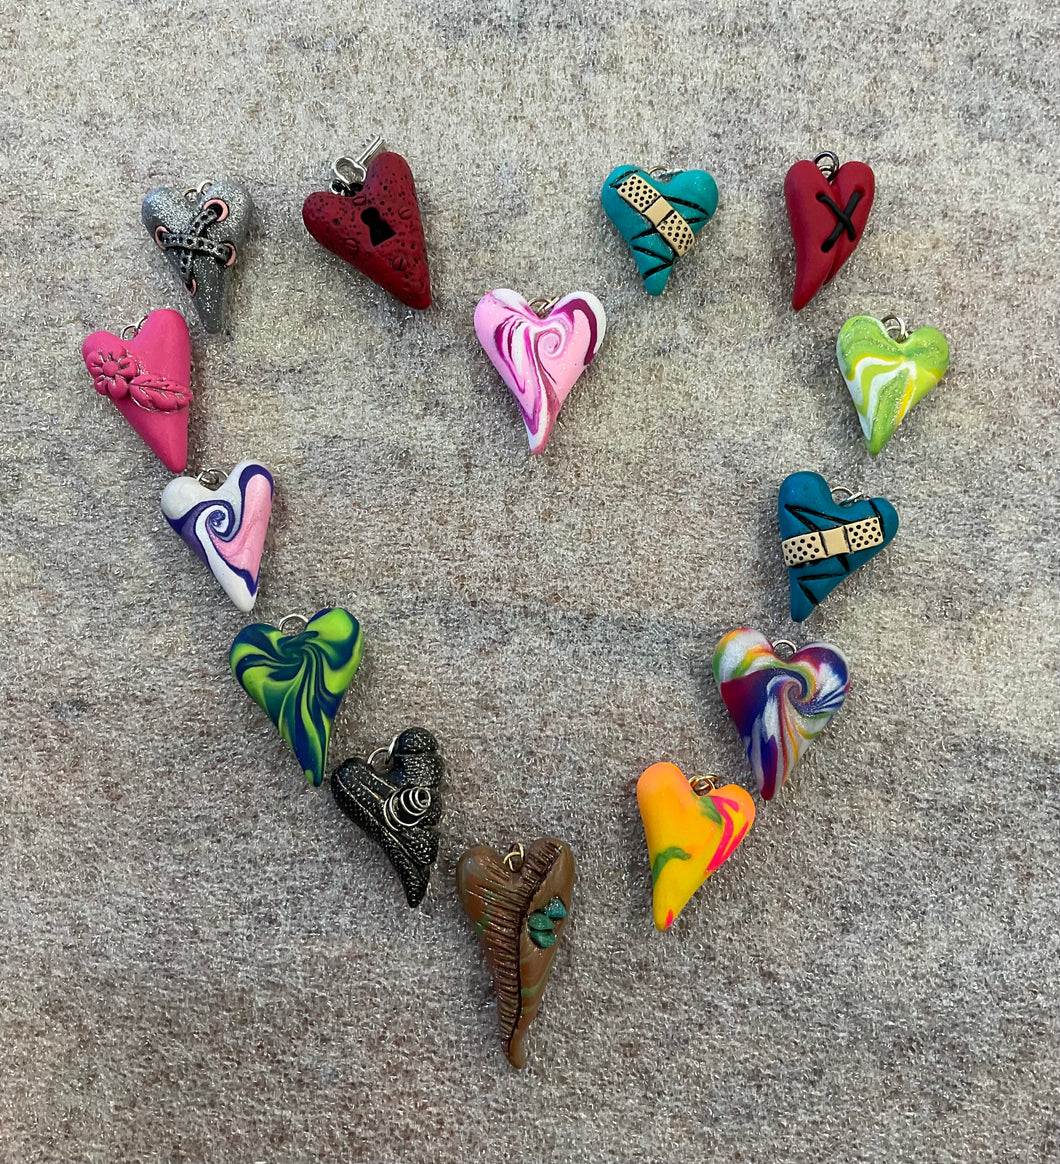 Curious Creations - Polymer Clay Heart Charms / Pendants